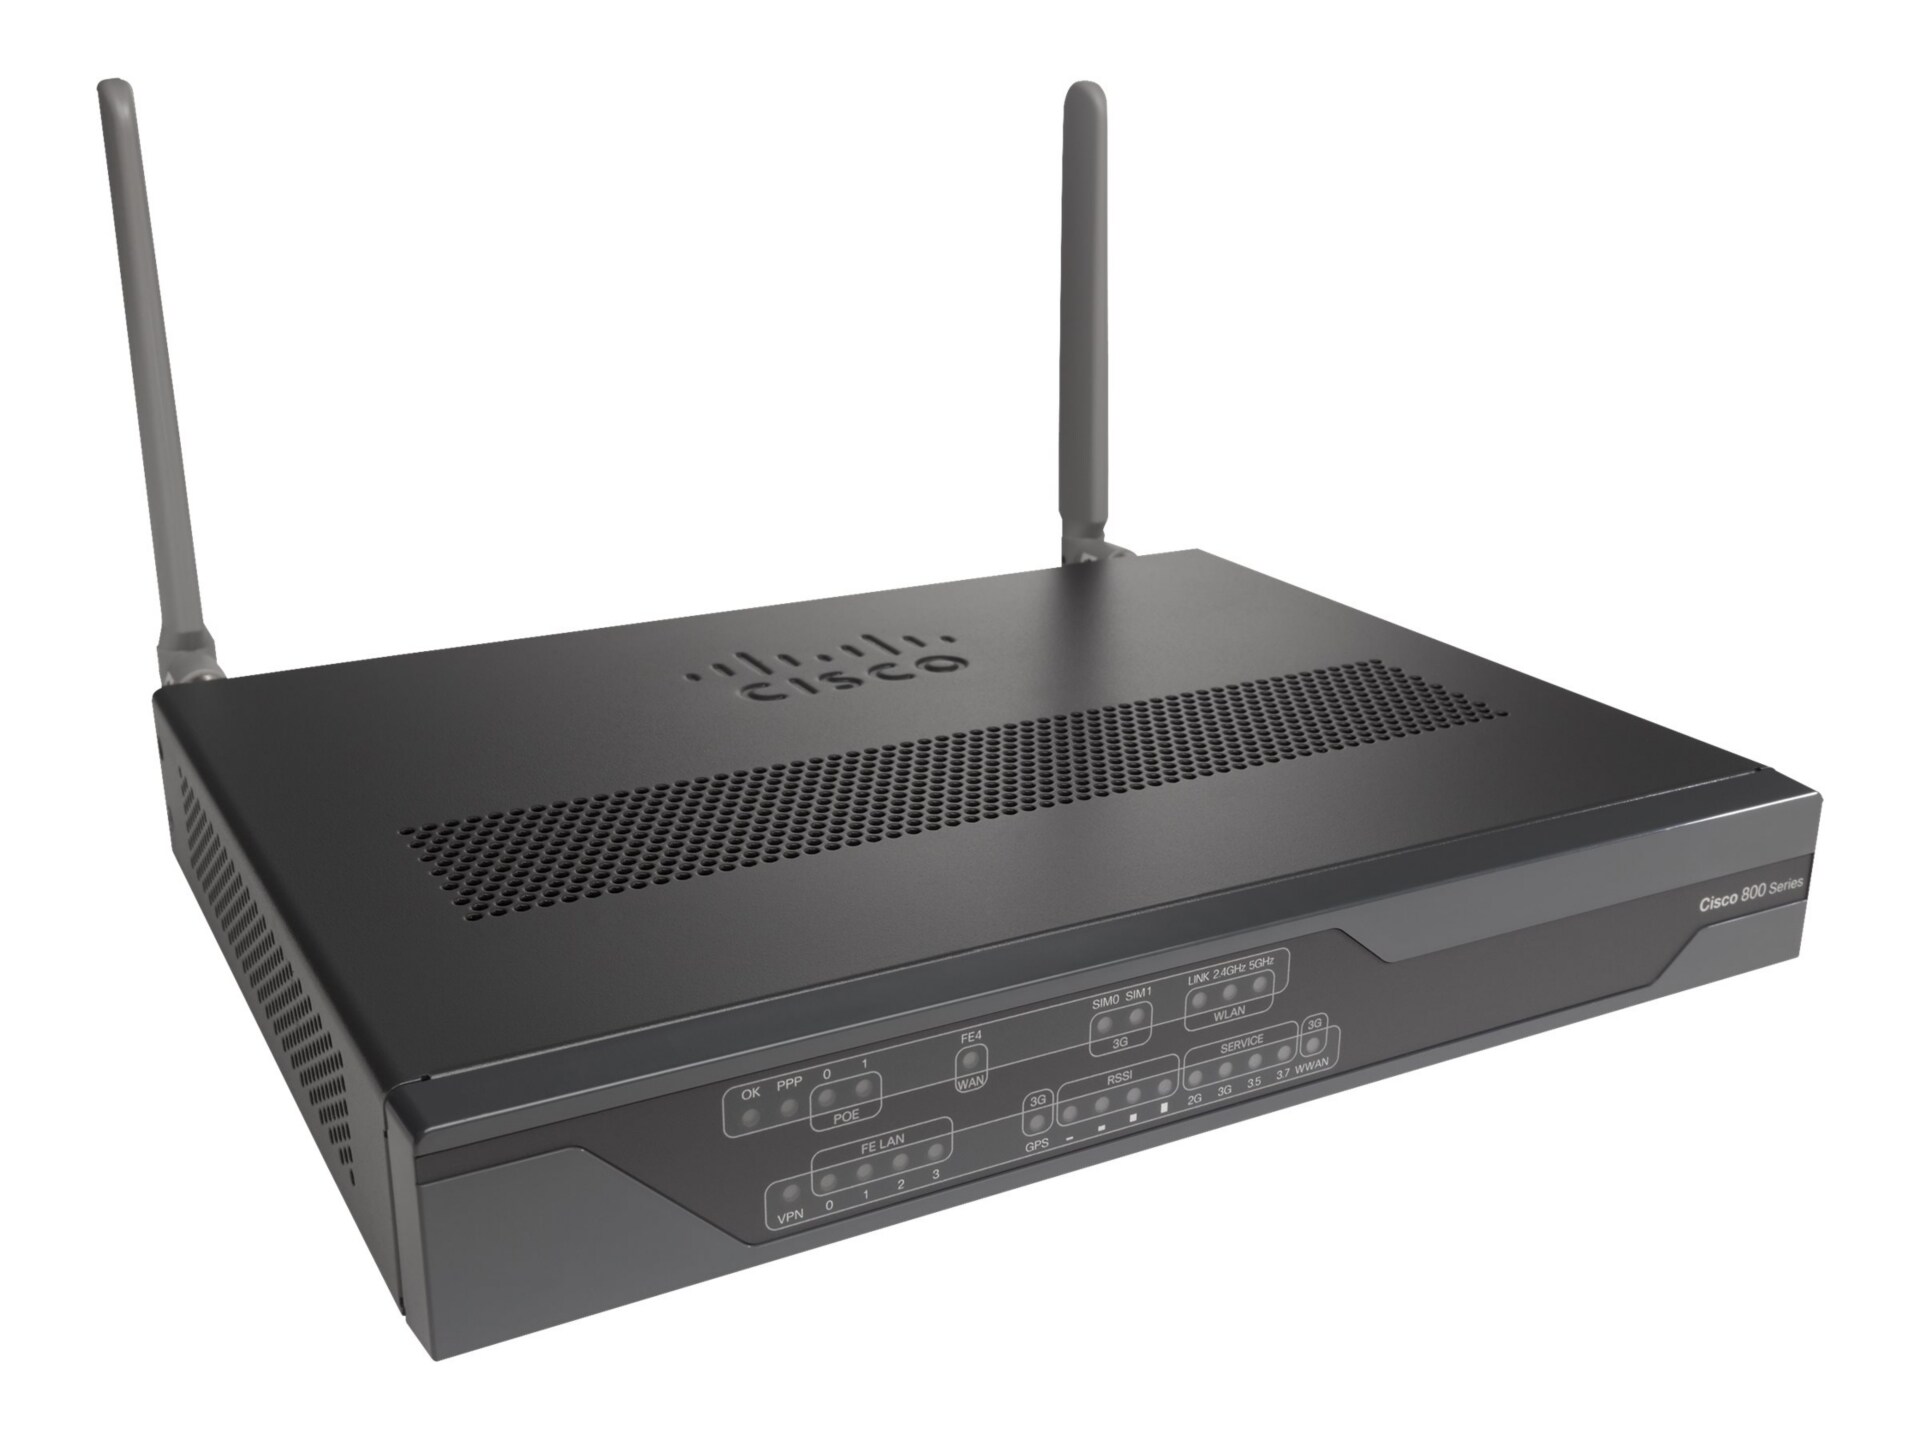 Cisco 881 Fast Ethernet Secure Router with dual radio 802.11n WiFi - wirele